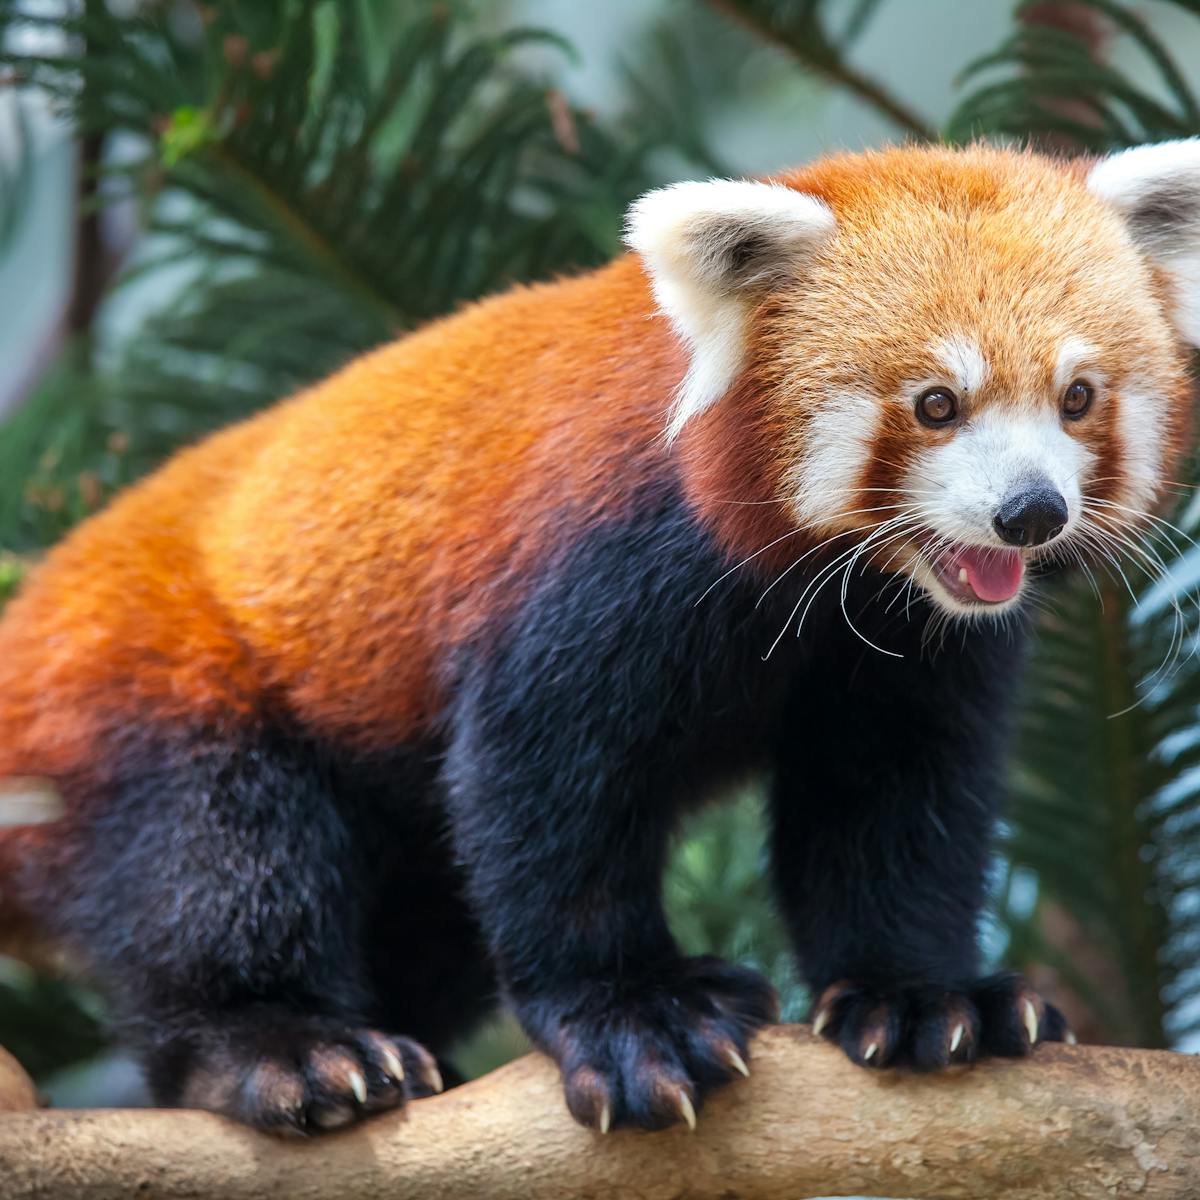 Red pandas may be two different species - this raises some tough questions  for conservation